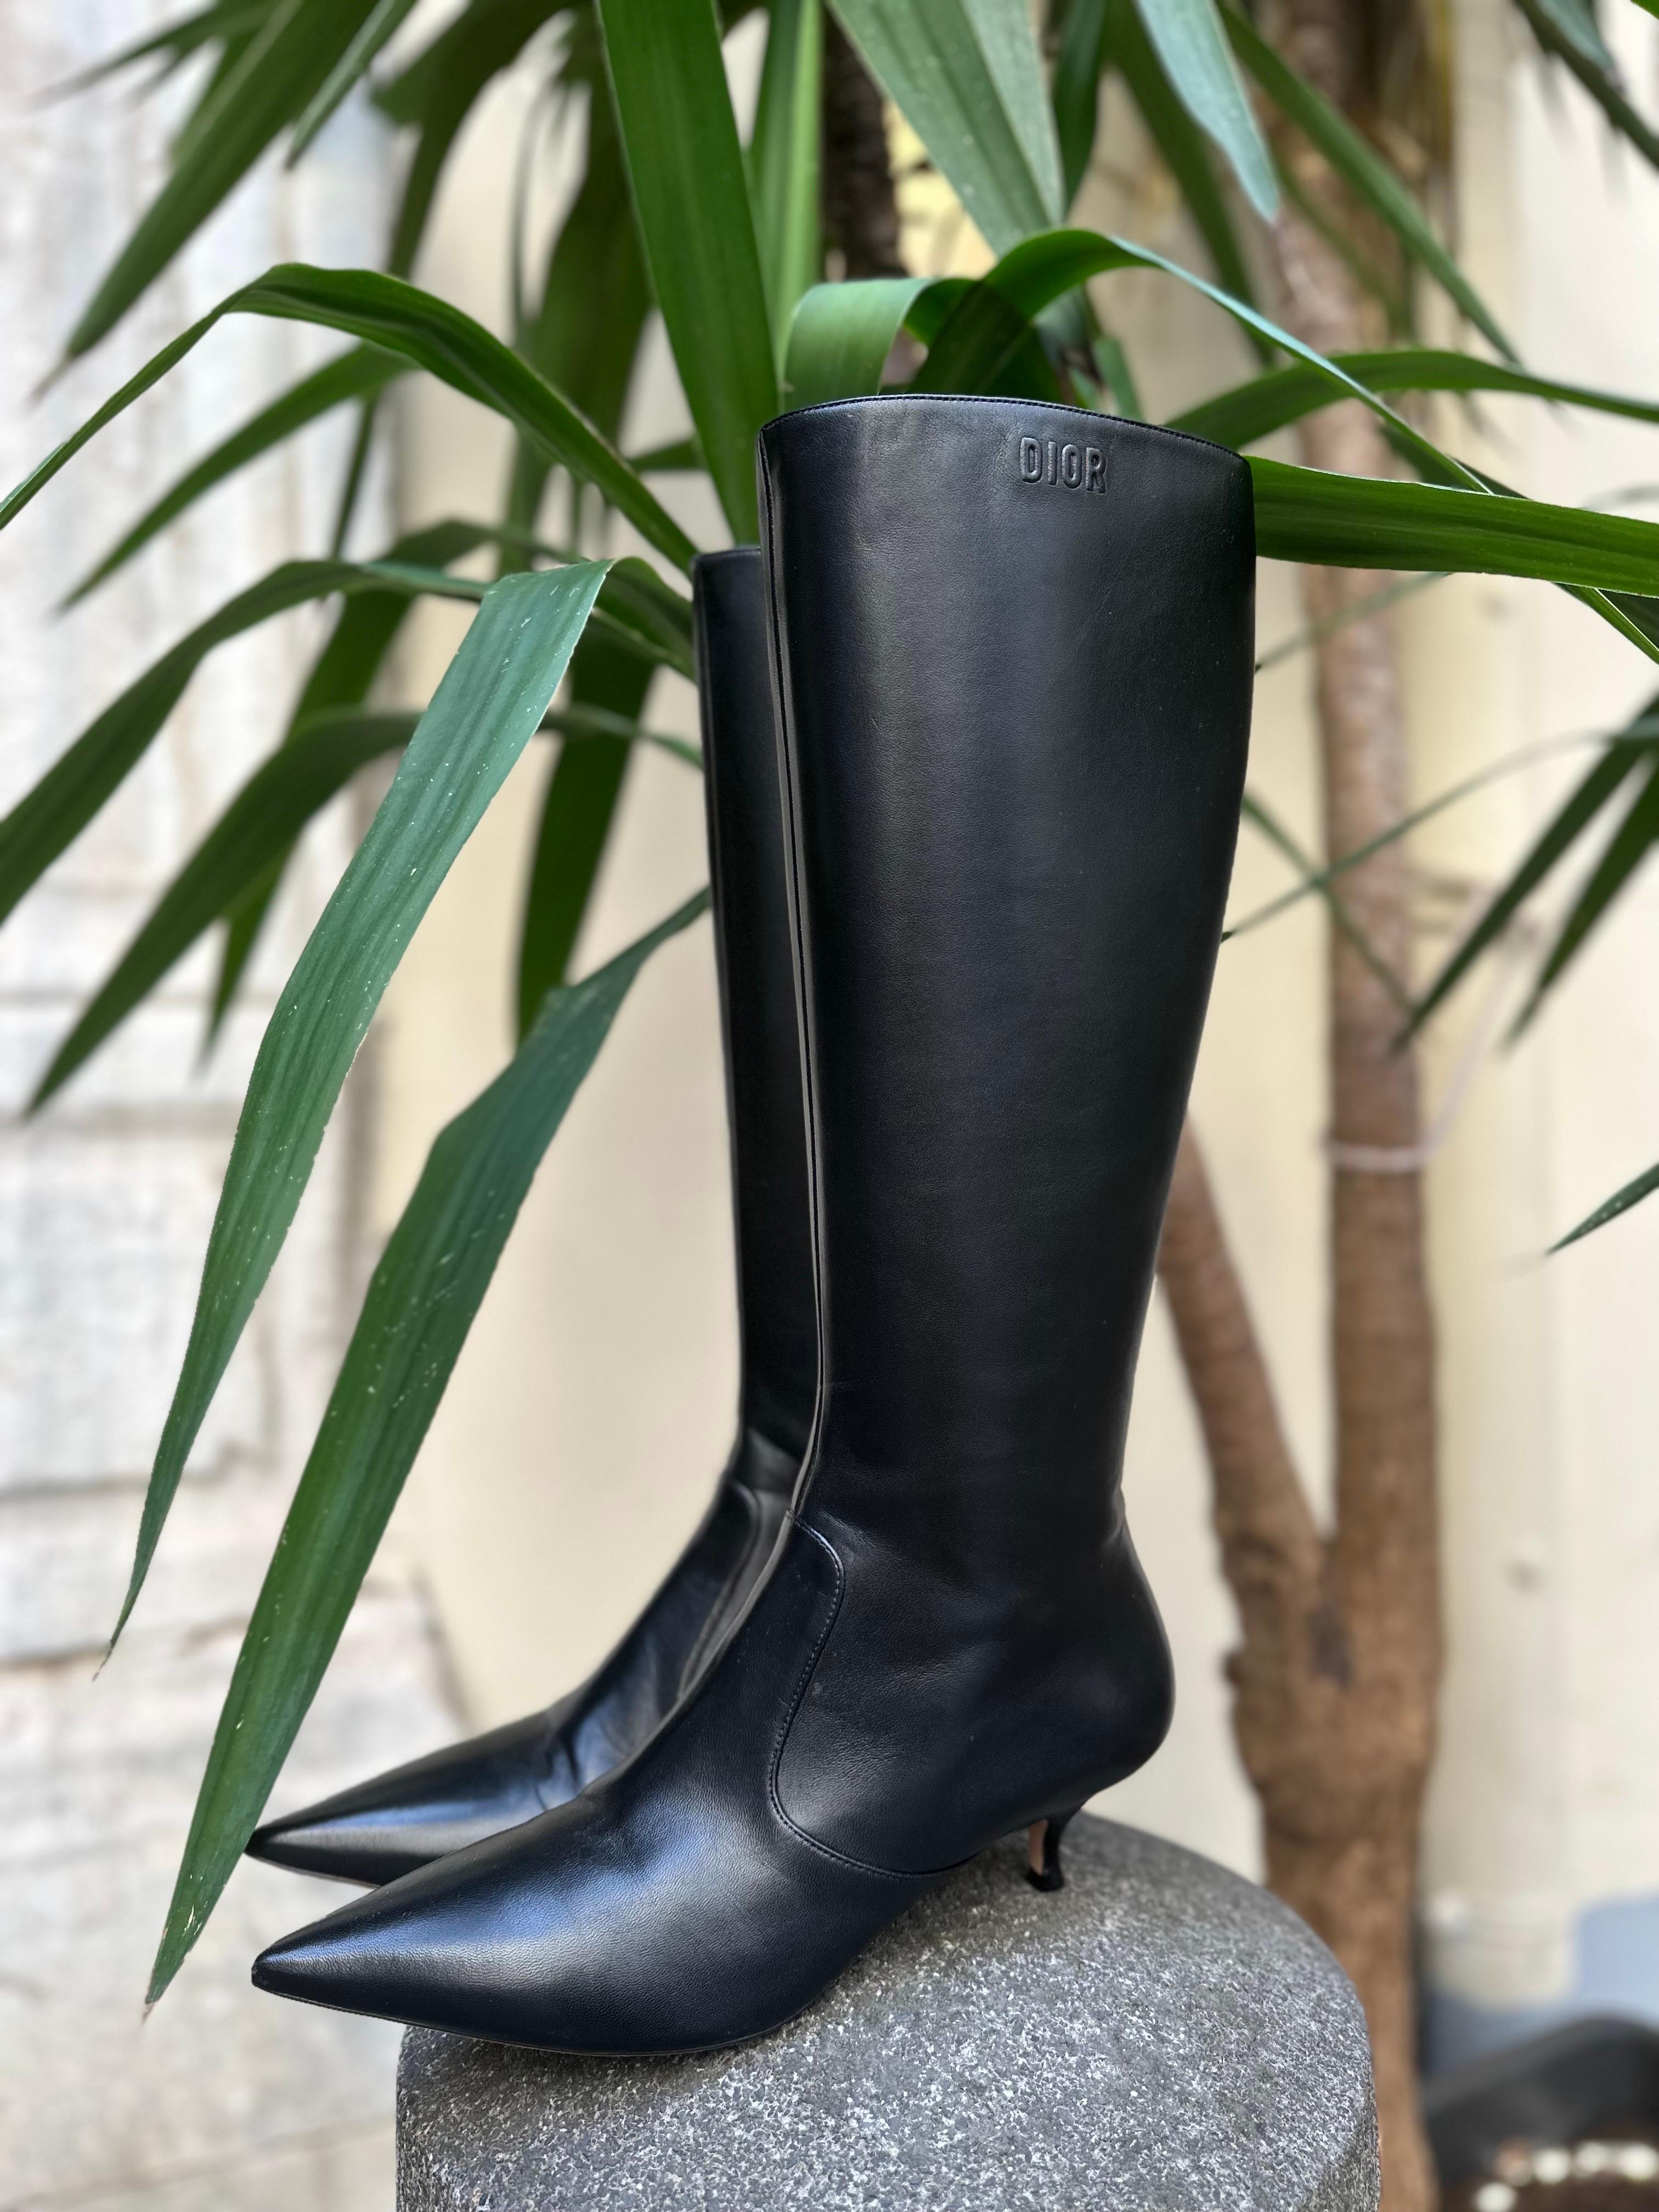 Dior Boots Black Leather Low Heels 10